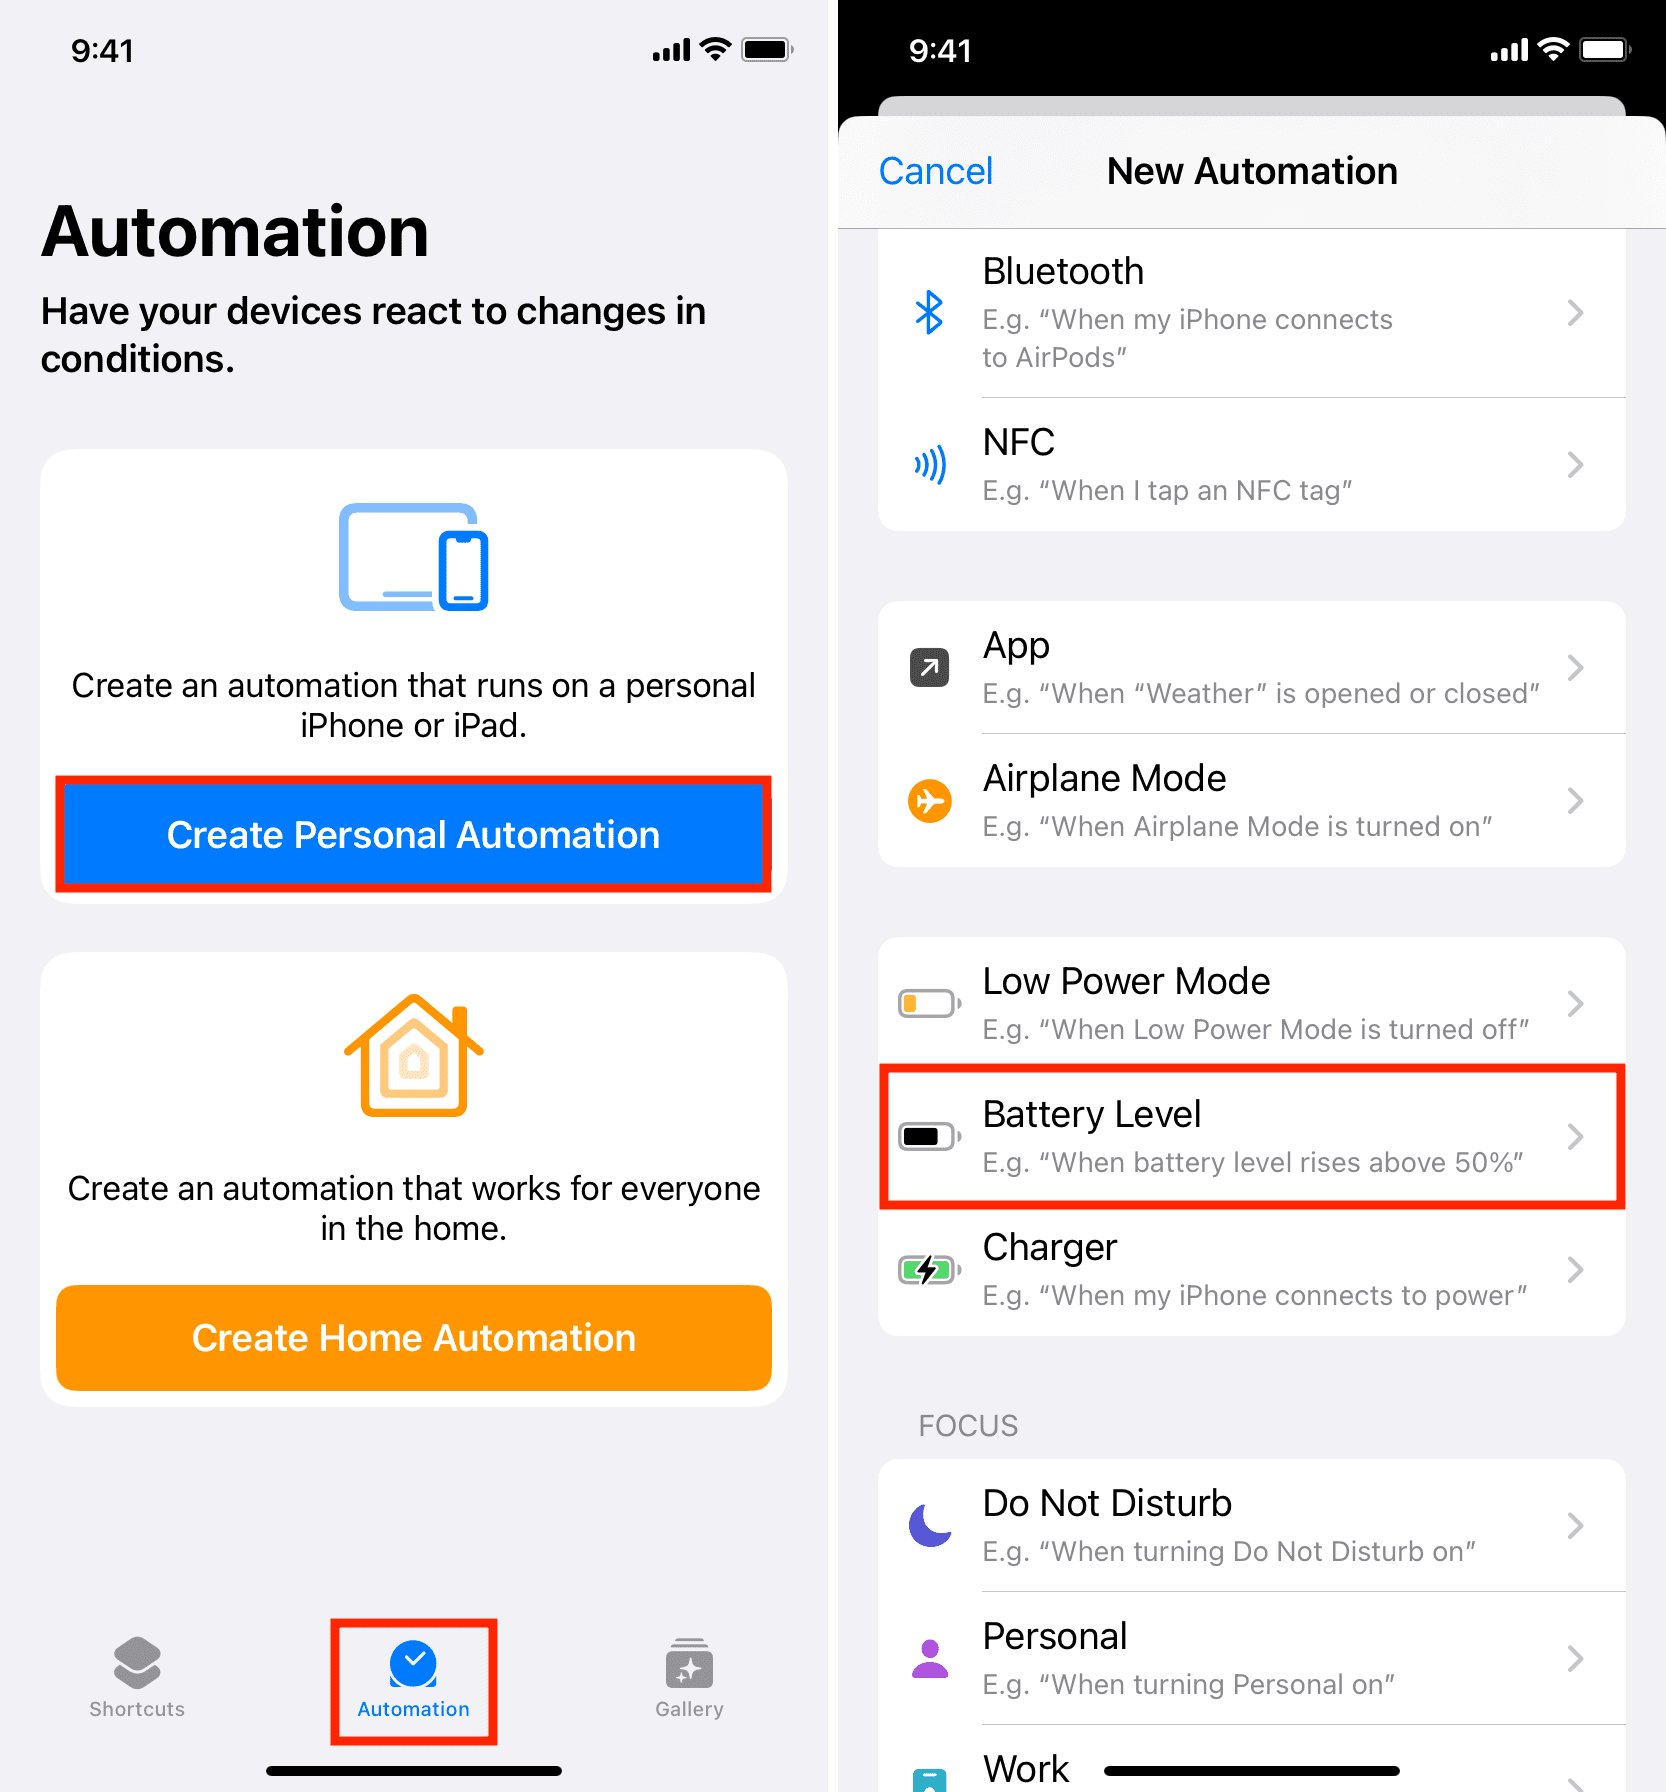 Create new iOS automation and choose Battery Level